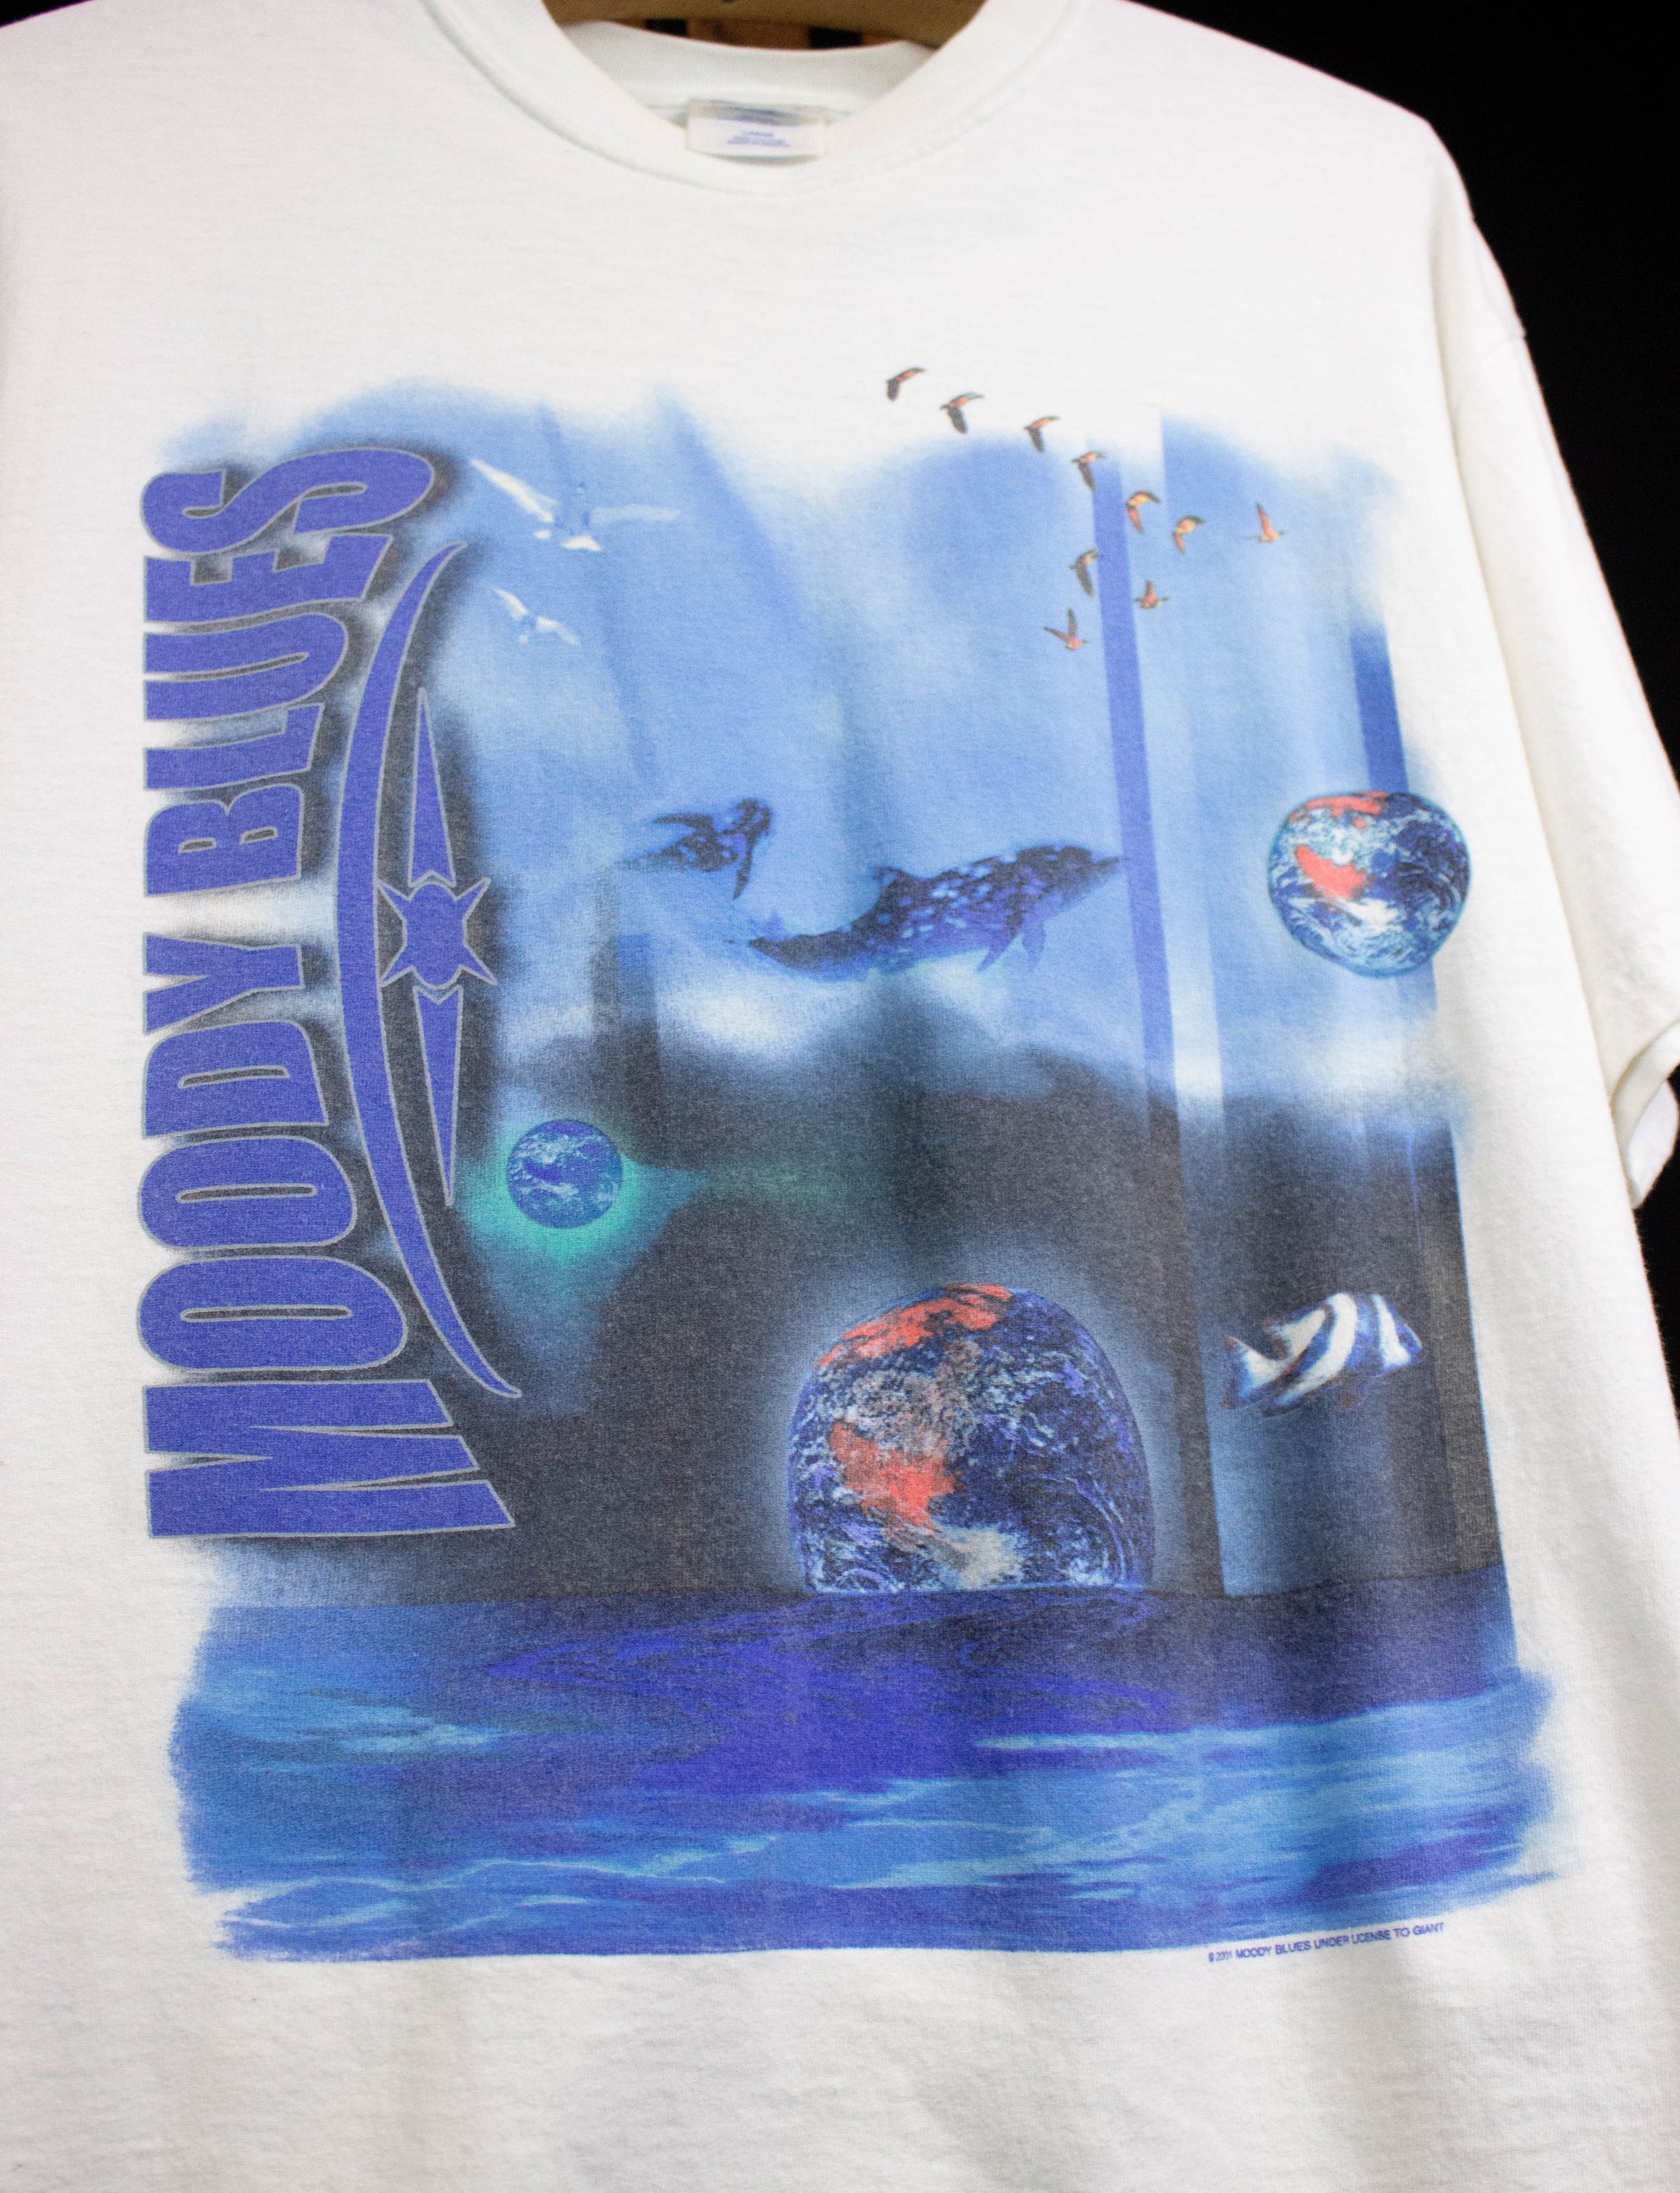 Moody Blues 2001 Concert T Shirt White Large